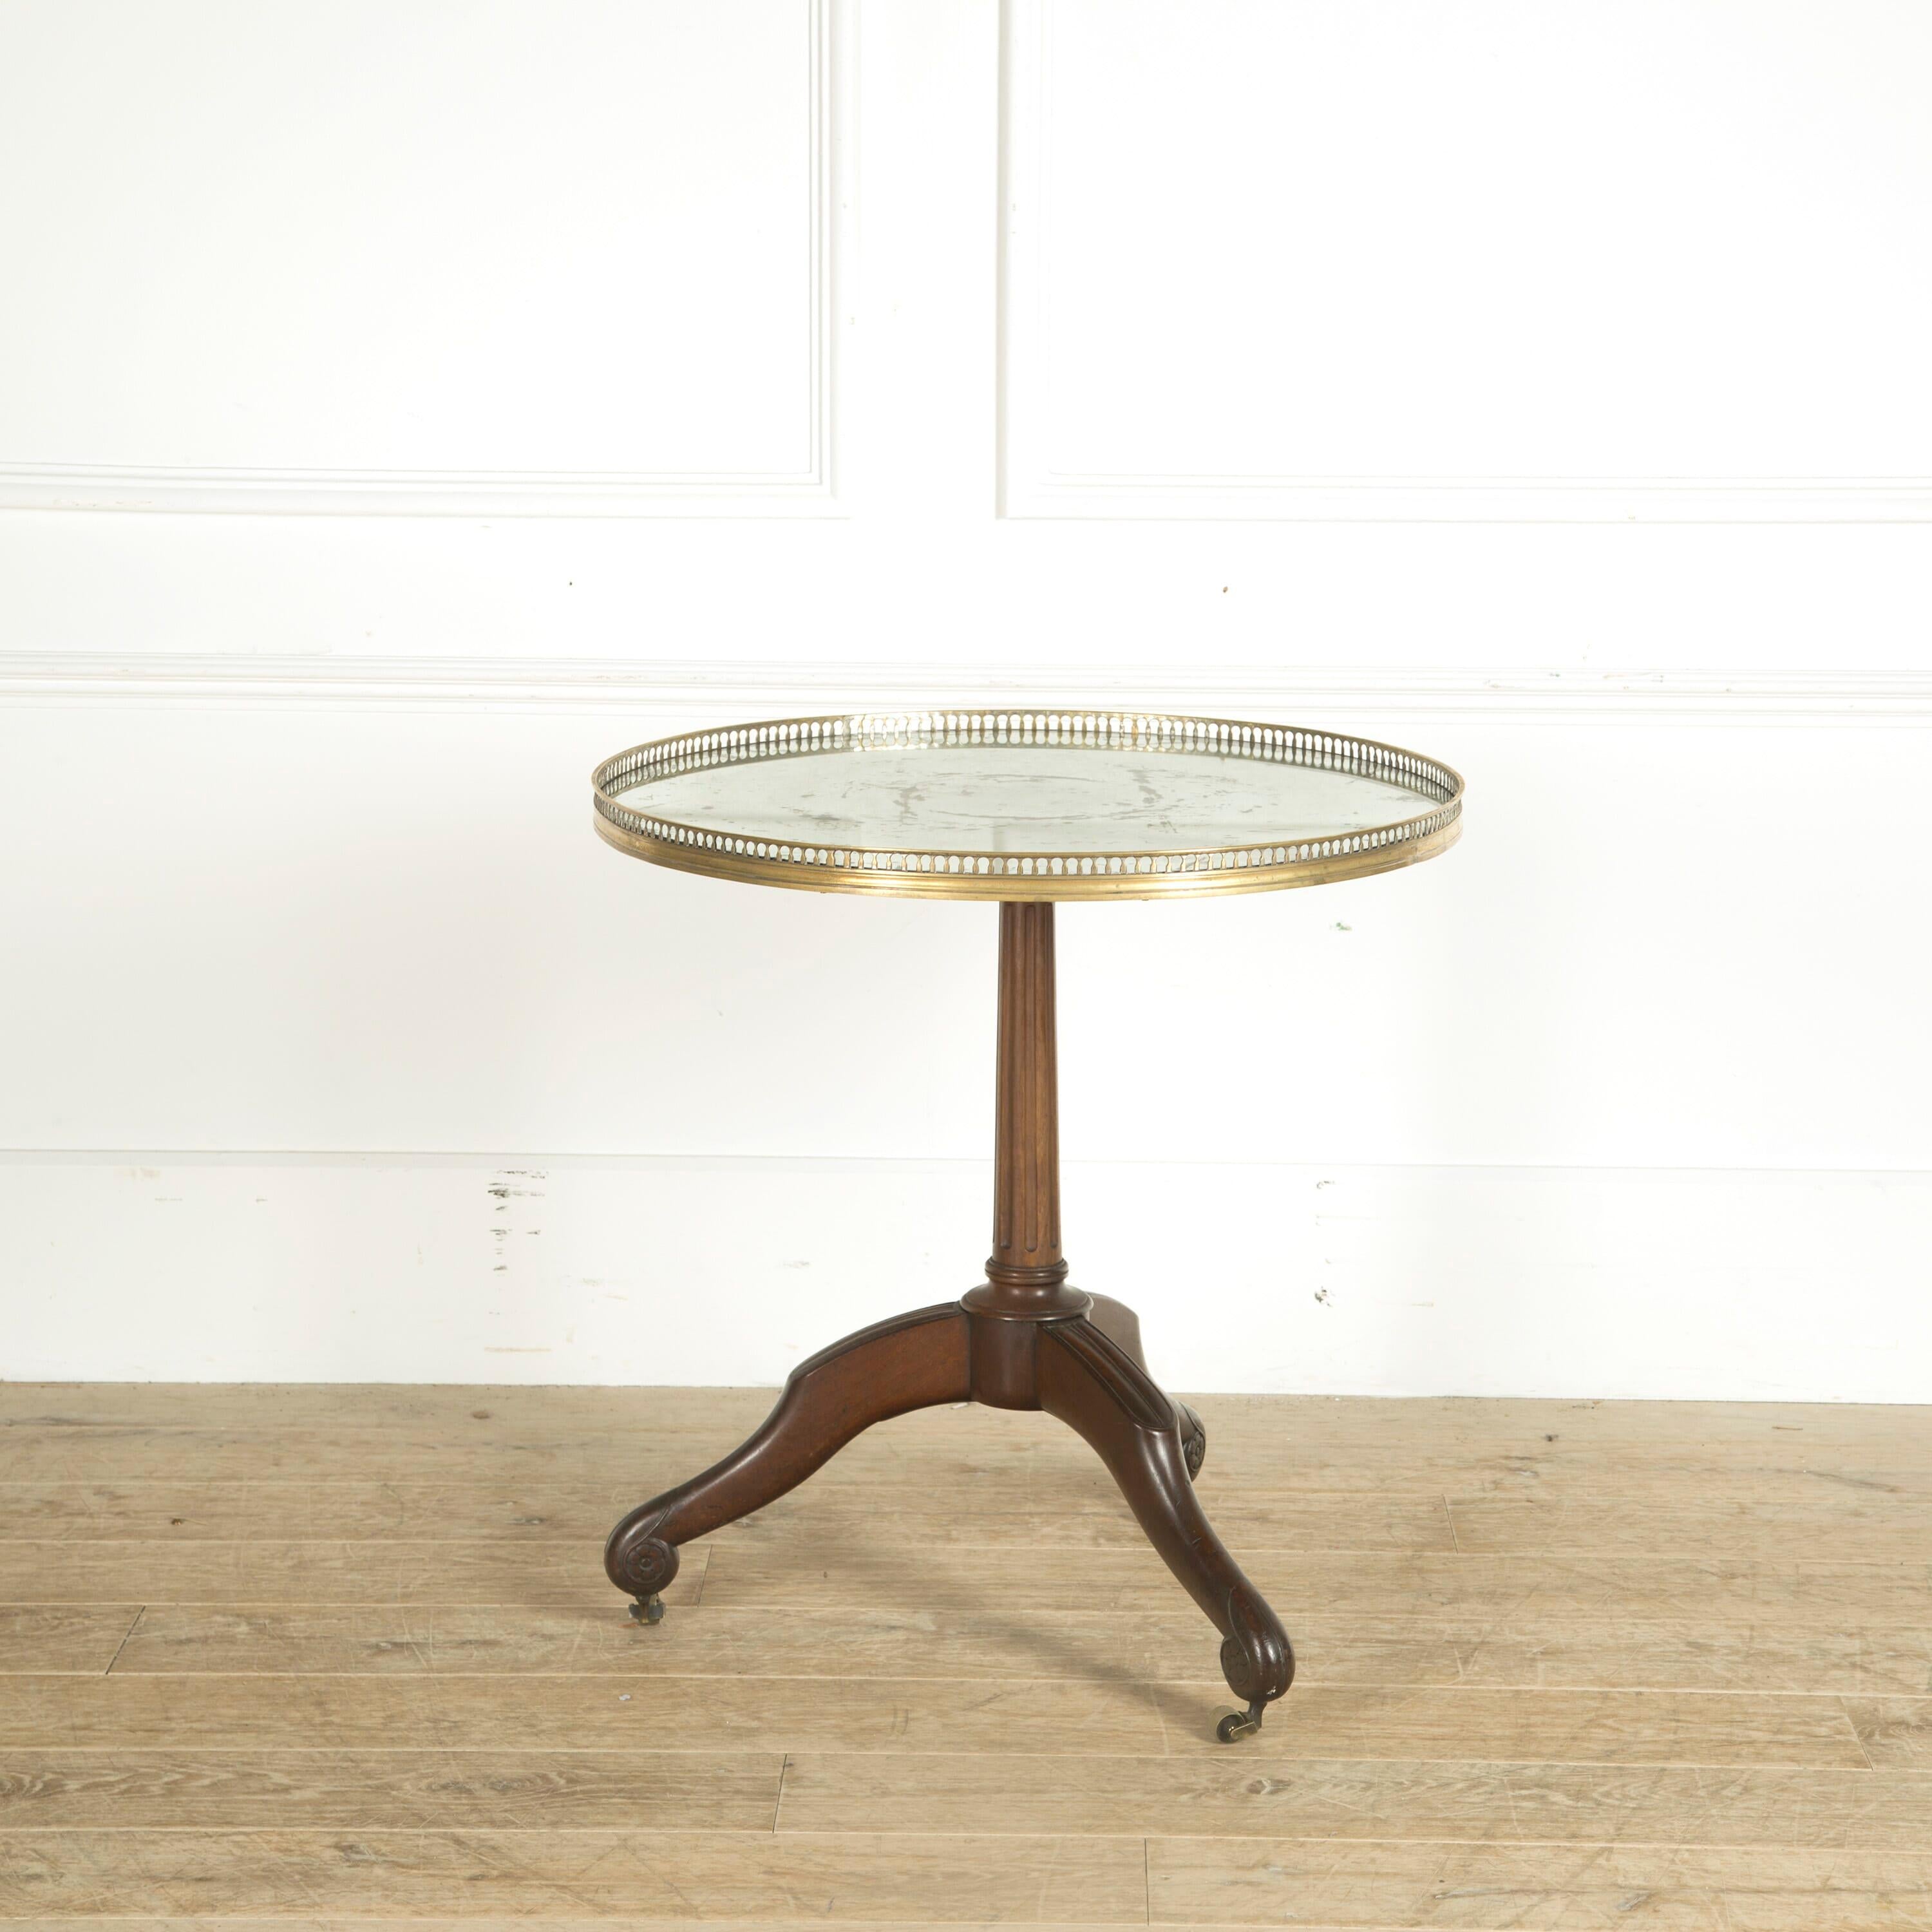 A stylish early 19th century French oak table base with later (19th century) mirrored and galleried top.